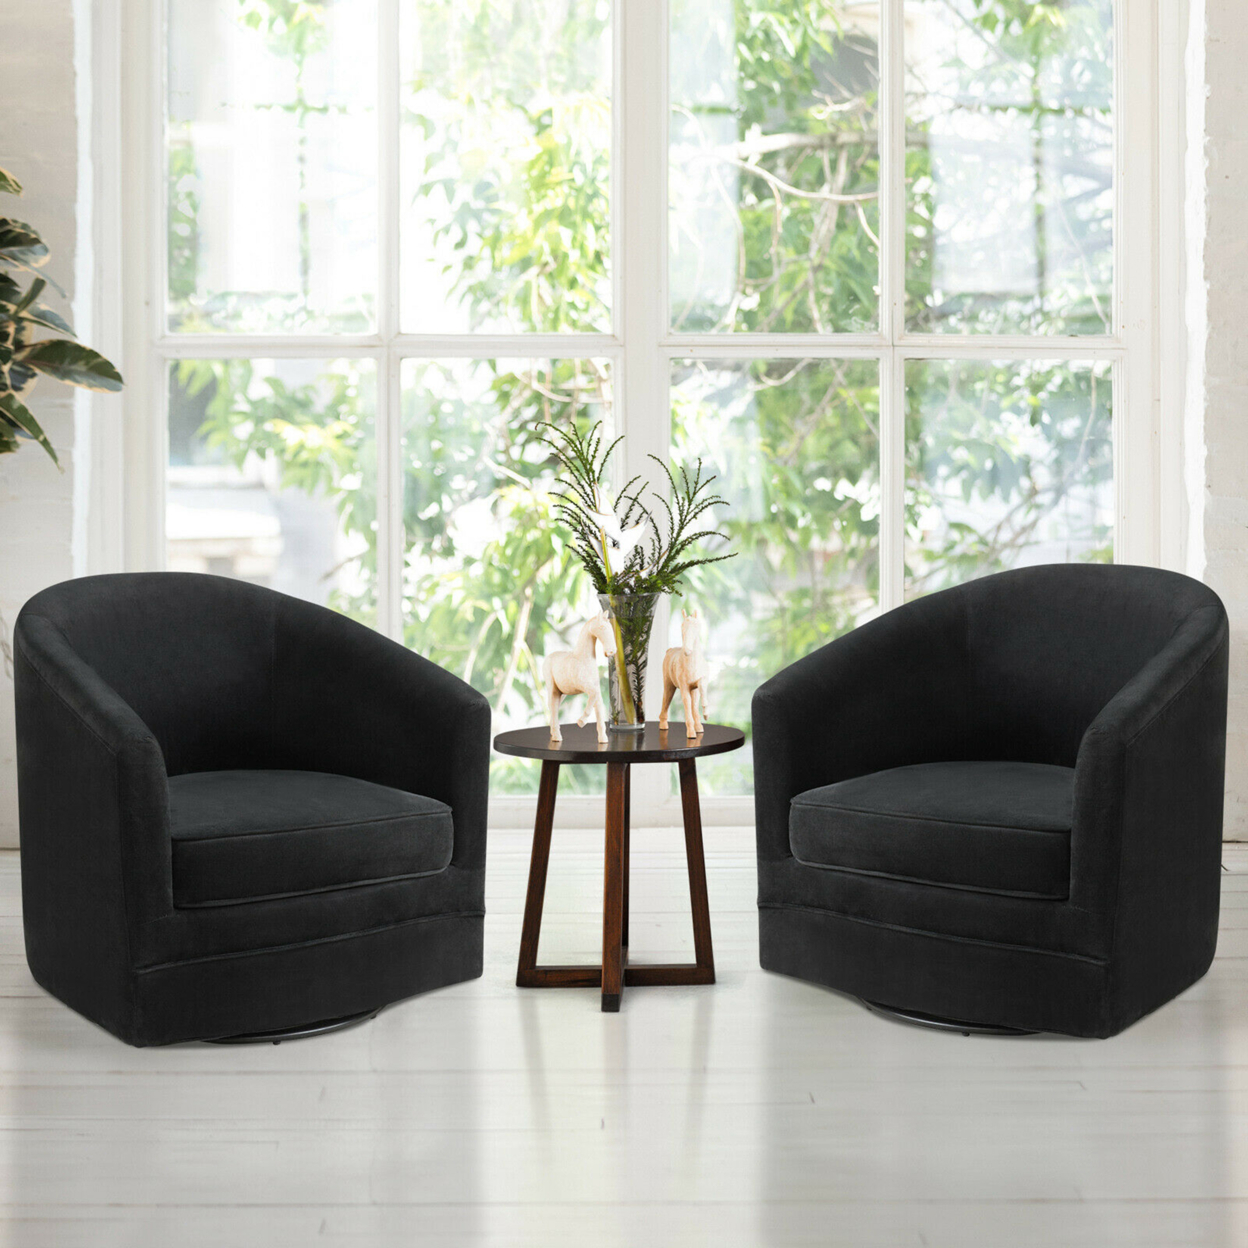 Set Of 2 Modern Swivel Barrel Chair Velvet Accent Chair With Metal Base